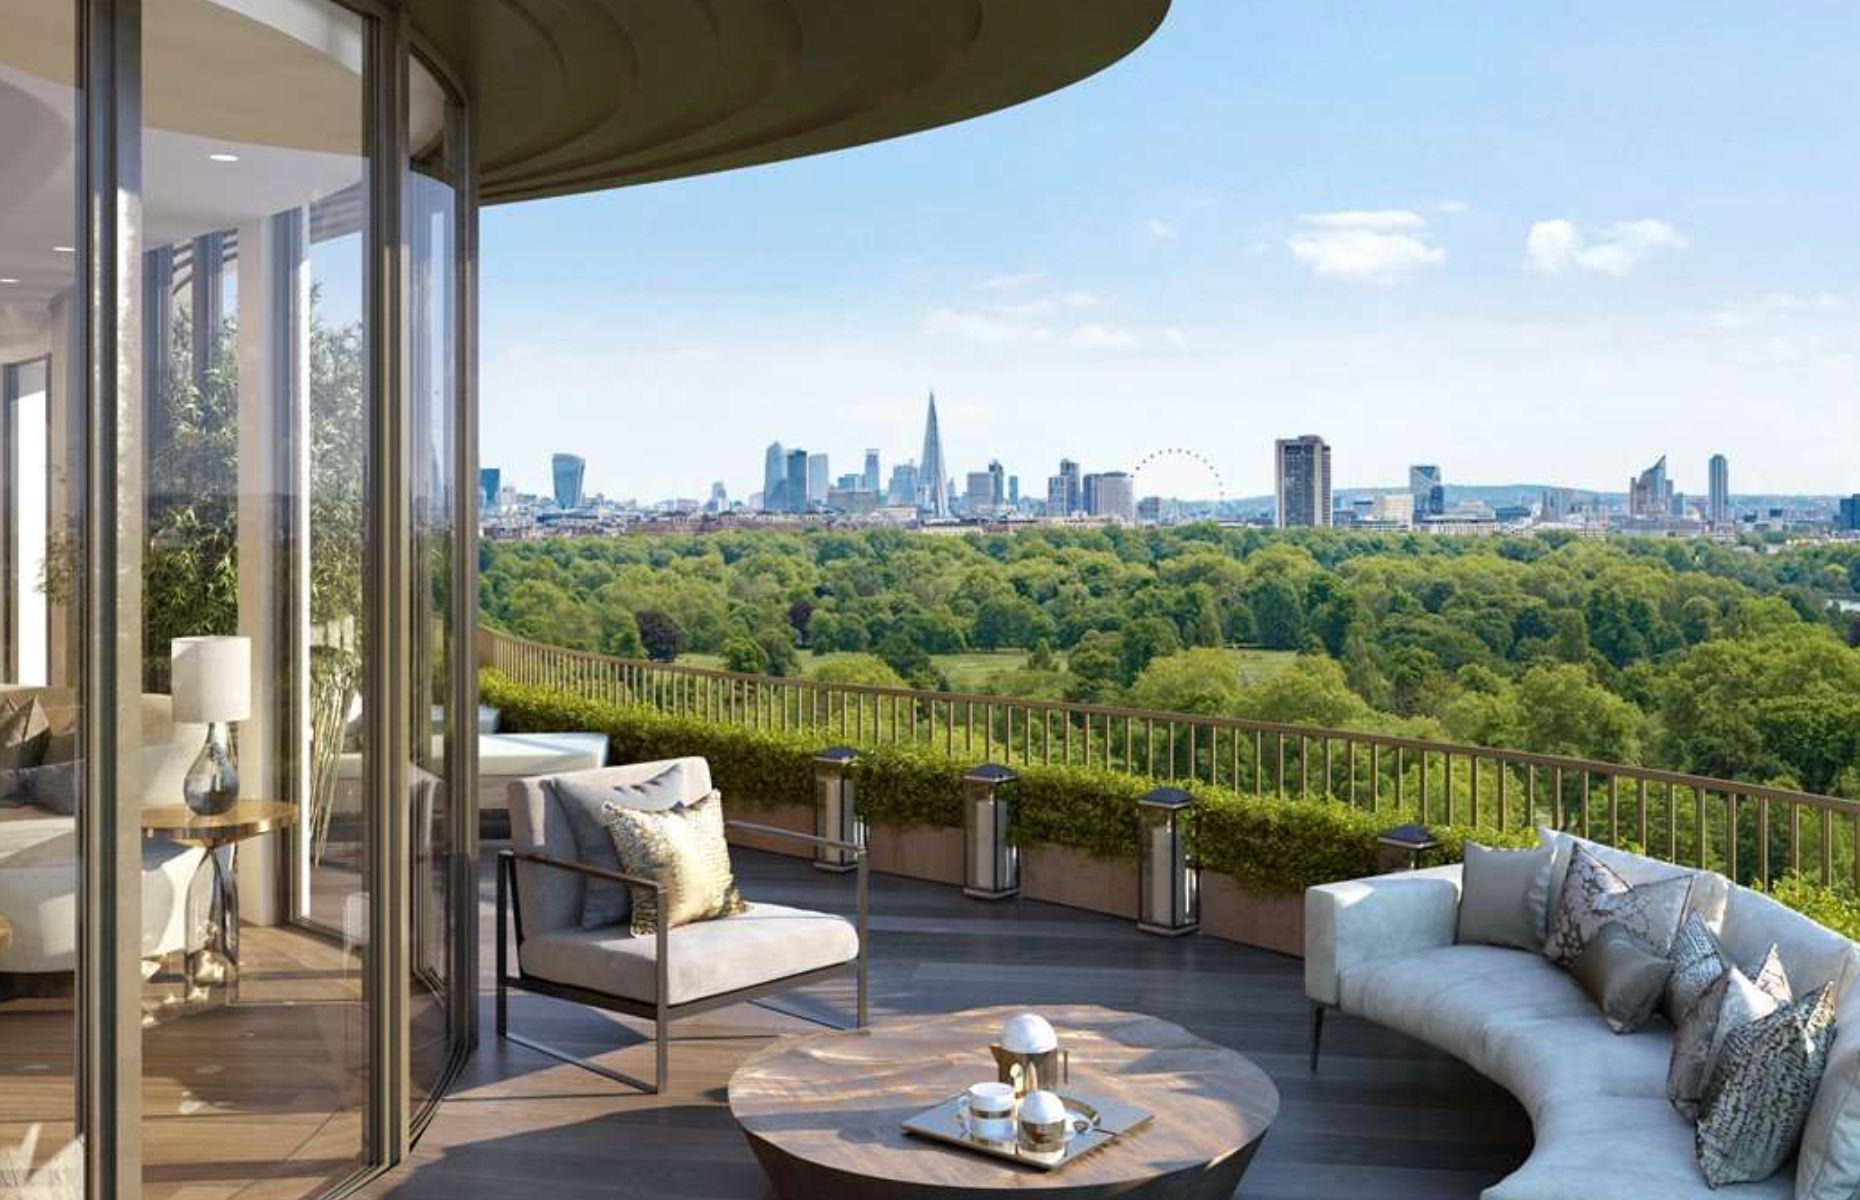 <p>Spanning nine floors, it’s comparatively low-rise for most penthouses, but has views across Kensington Gardens and Hyde Park towards the city, where you can easily spot the Shard, the London Eye, and the Fenchurch Building, otherwise known as the 'Walkie-Talkie' building. At 6,800 square feet, the five-bedroom apartment is more than spacious and within easy walking distance of fashionable Notting Hill, Kensington, and Mayfair. </p>